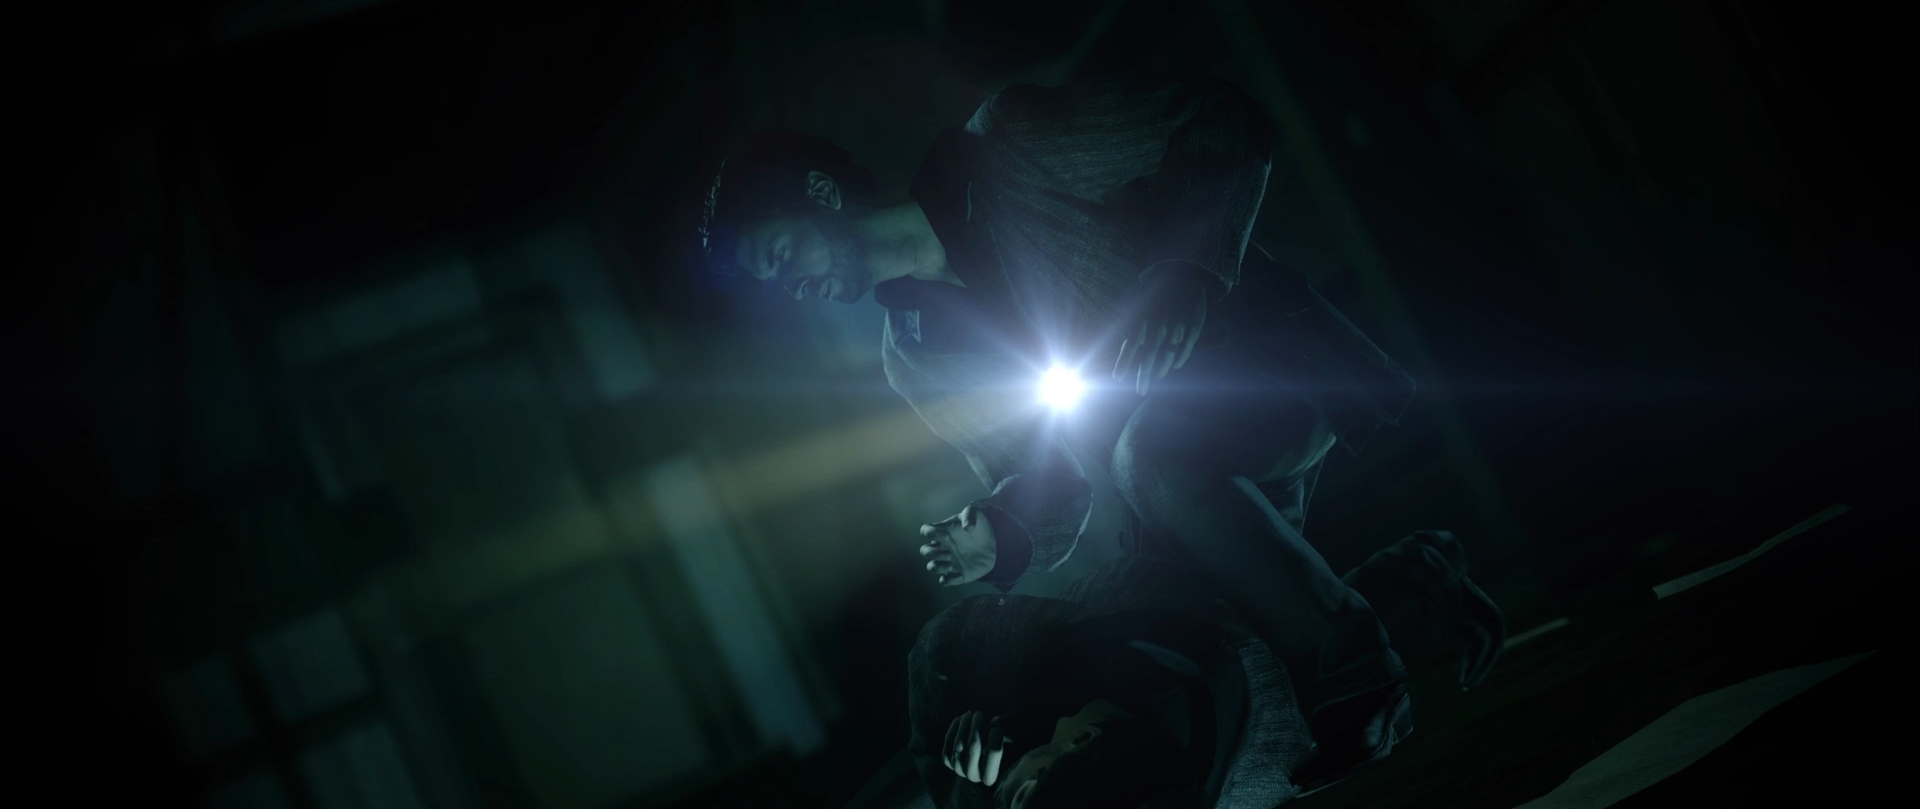 Alan Wake is a lost writer trapped in the nightmarish Dark Place